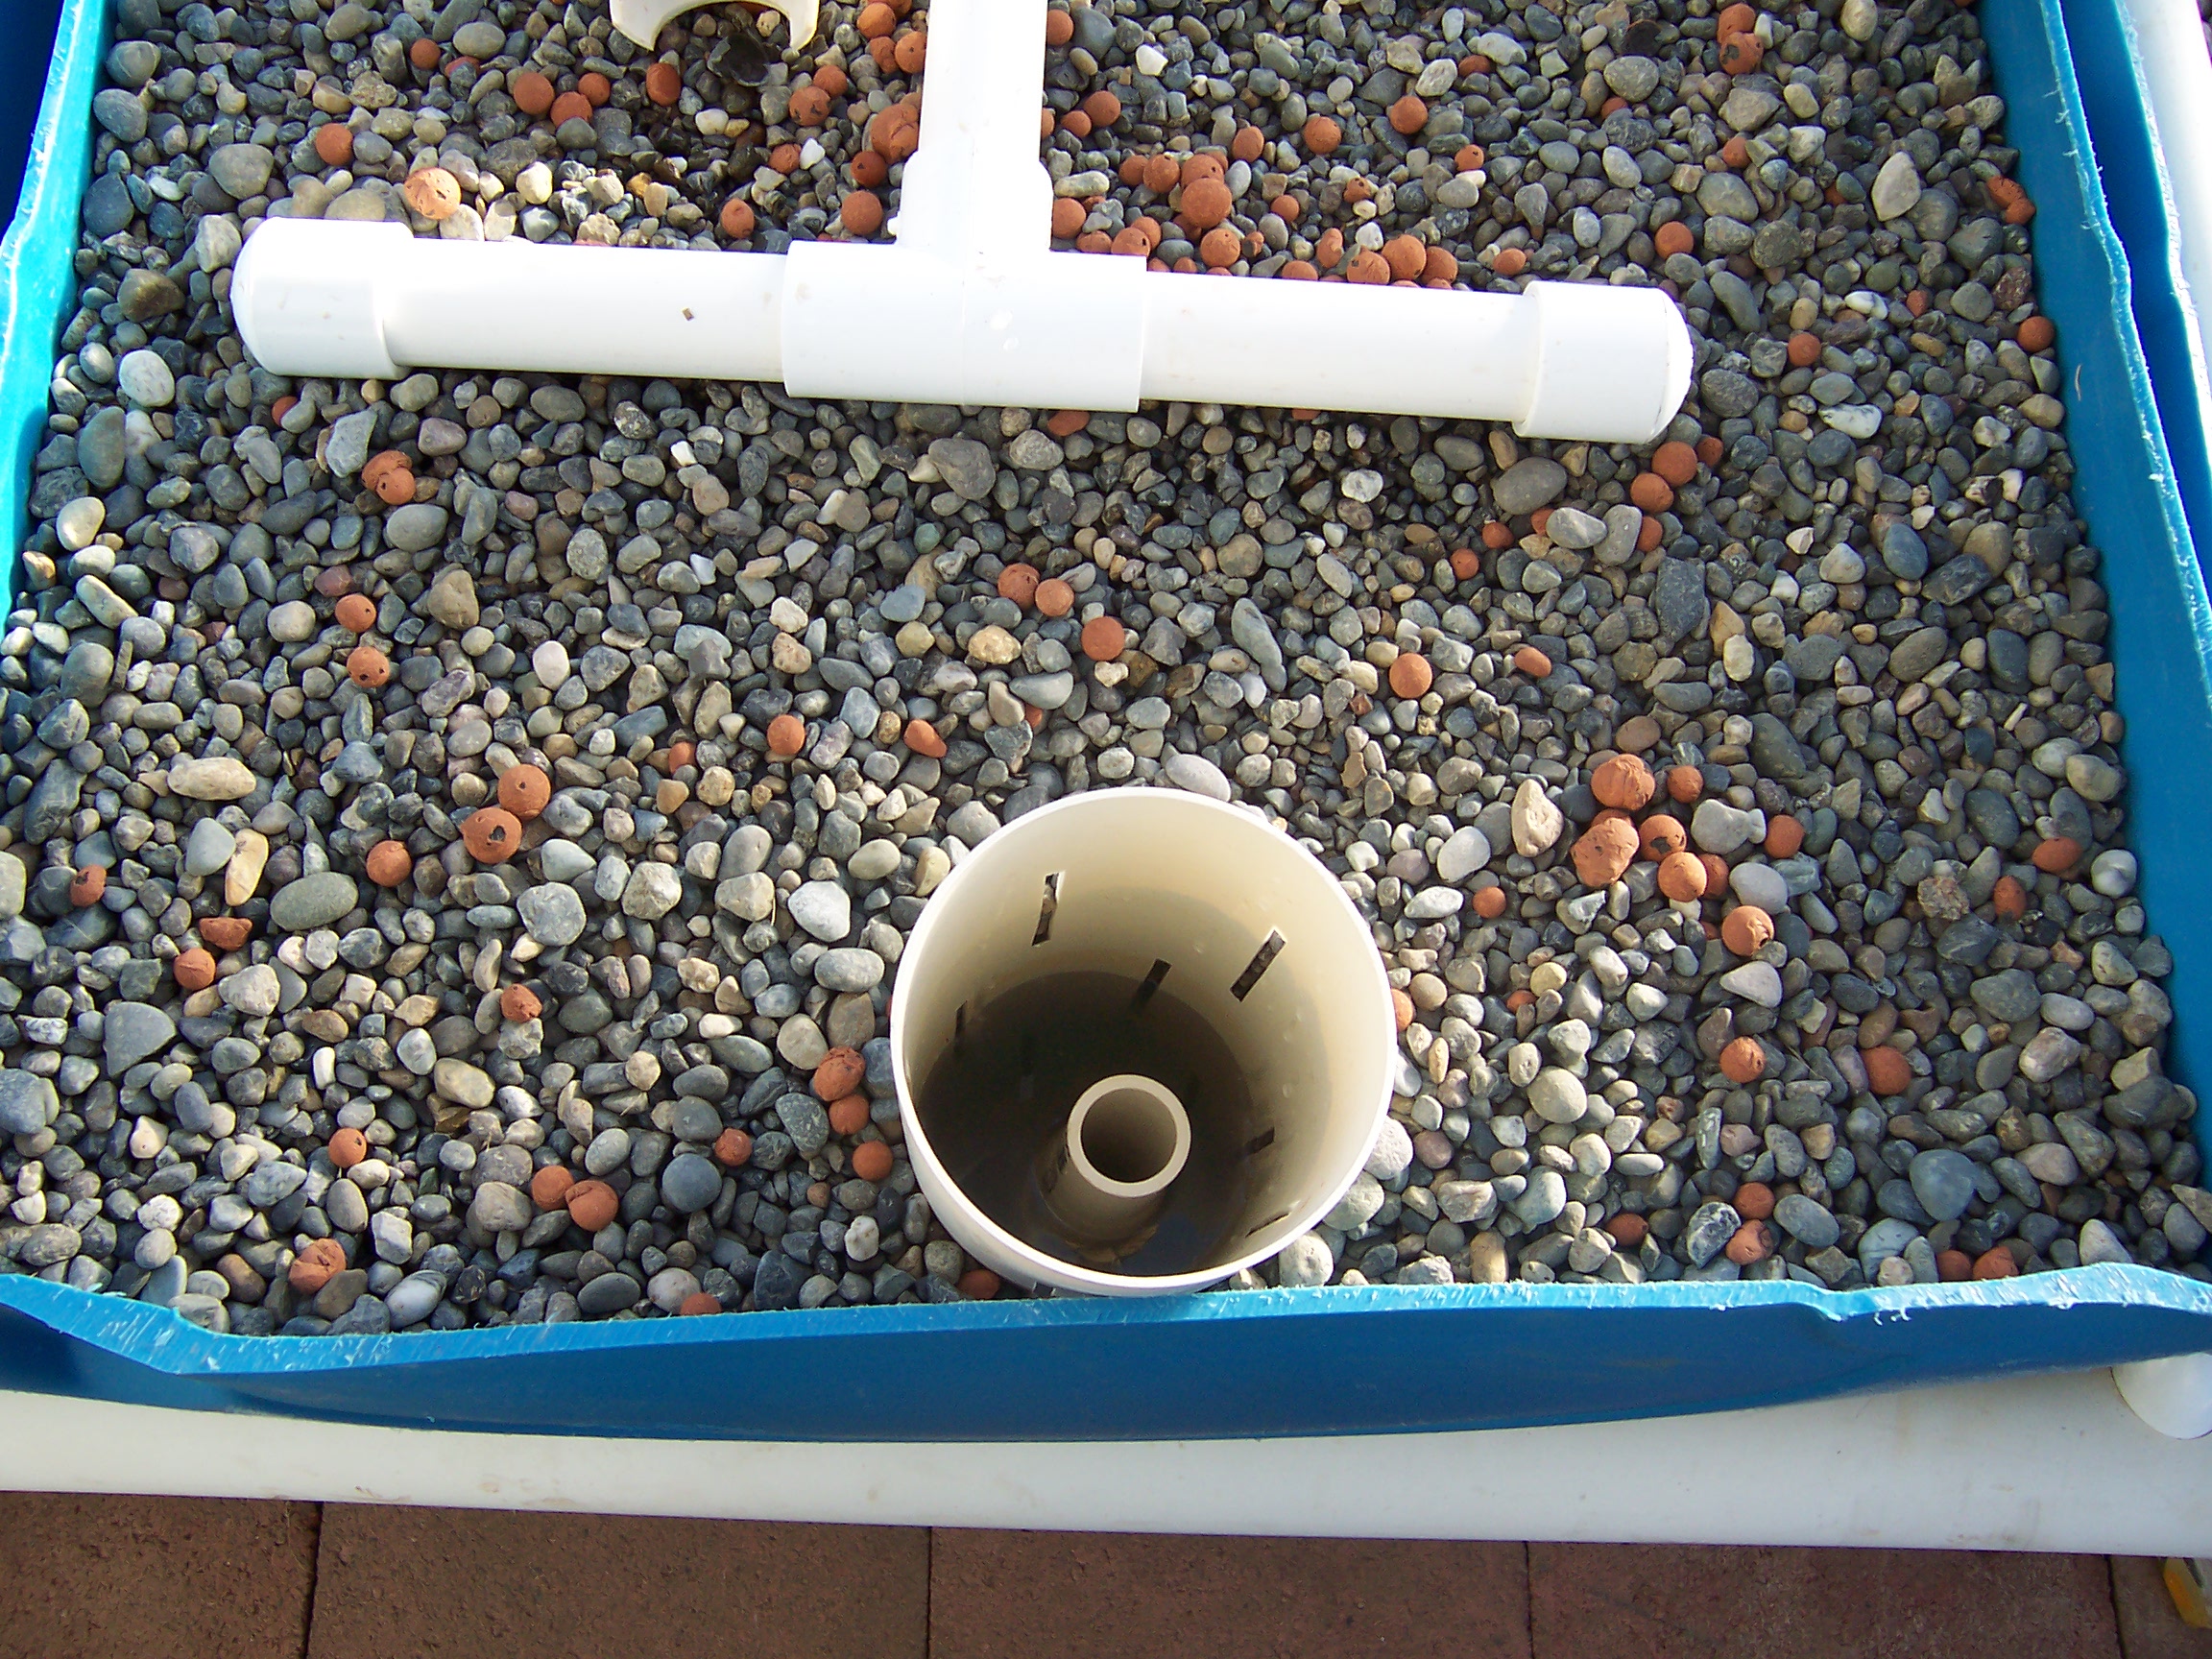 Aquaponics plumbing: Standpipe inside outer pipe